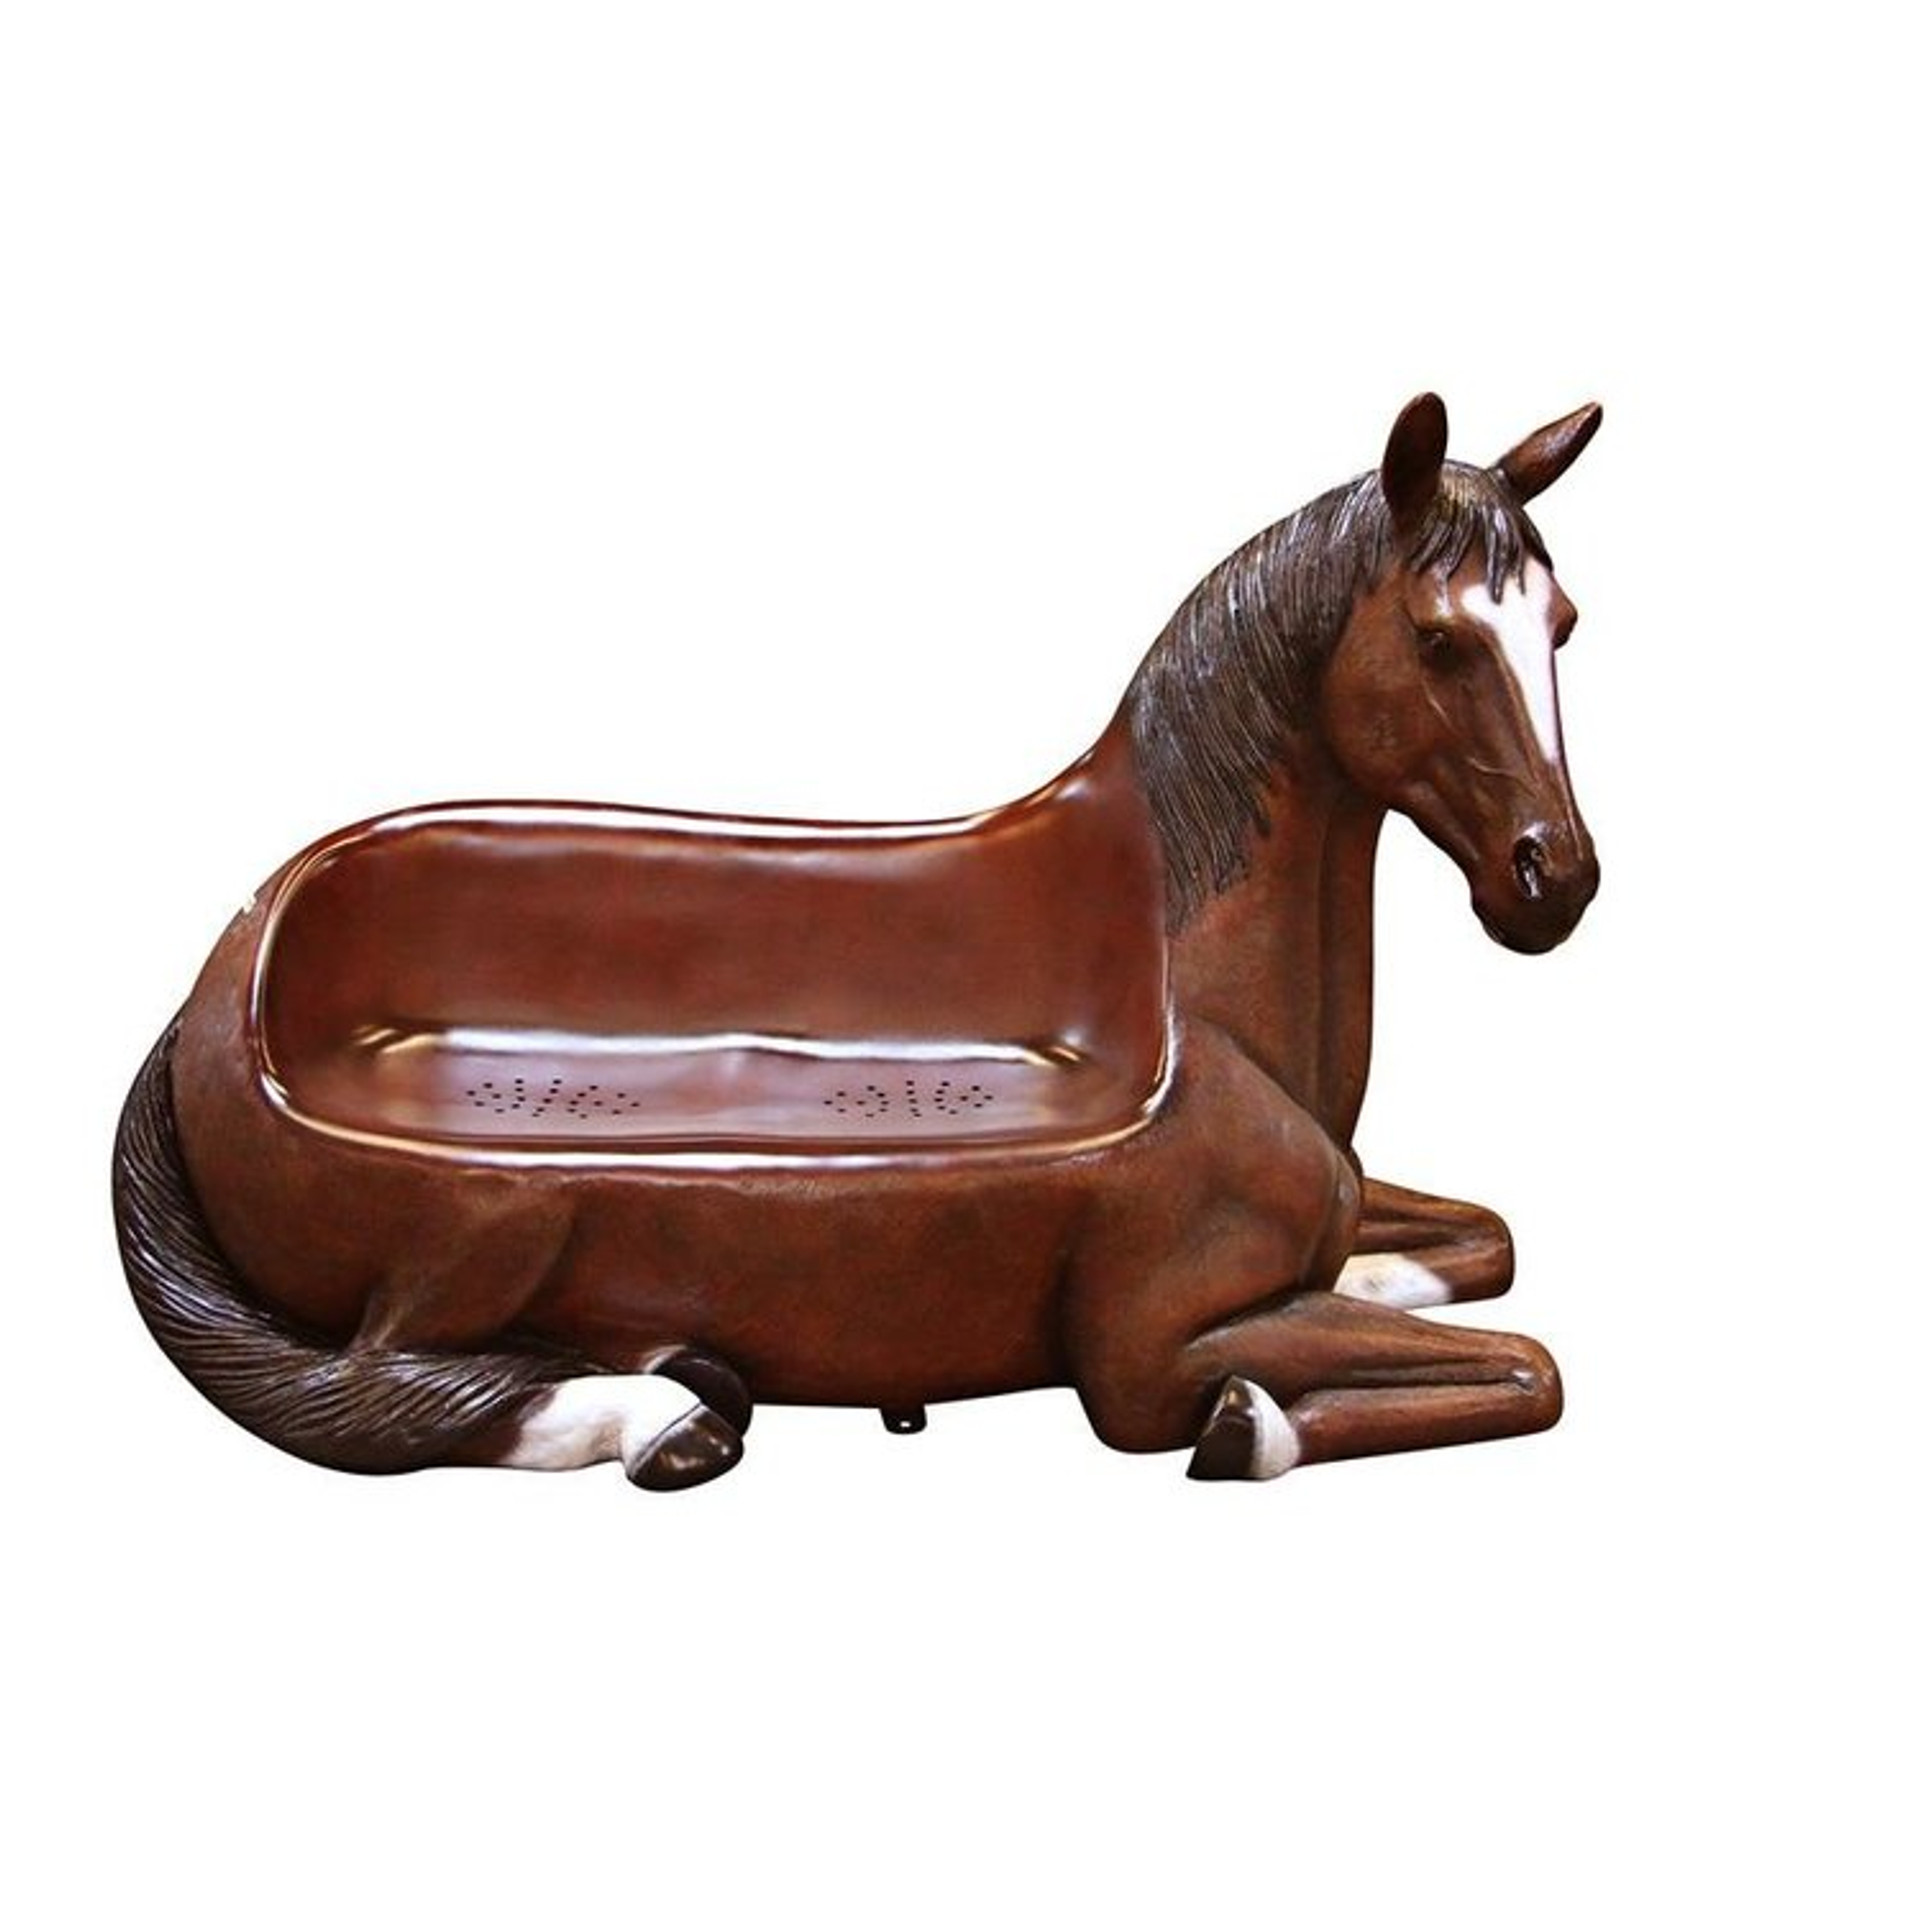 Saddle Up Horse Bench Sculpture - STOCK IS LIMITED, FIRST COME FIRST SERVED!